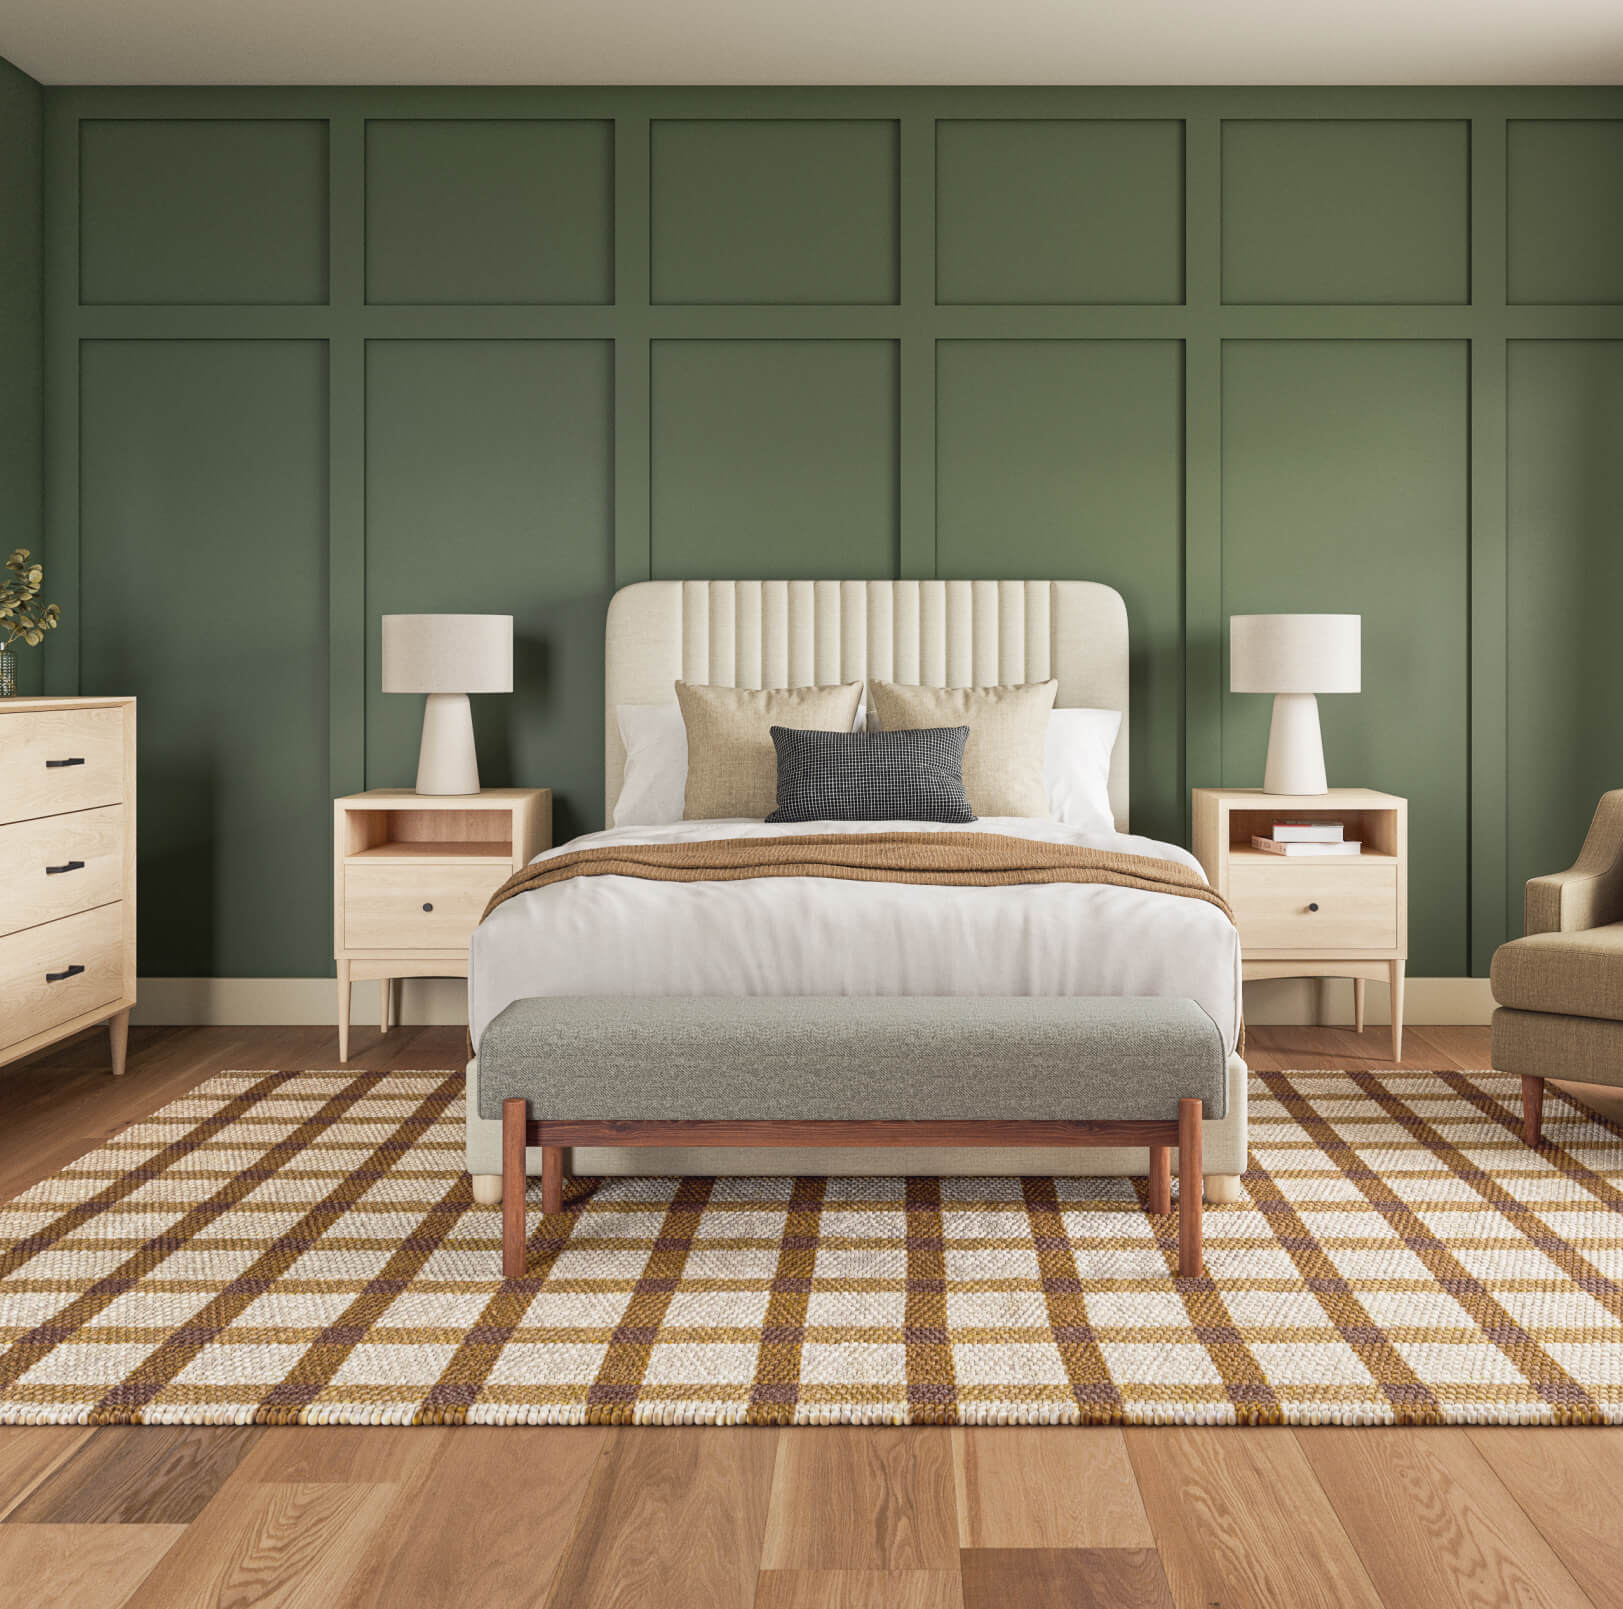 pippen upholstered bed in green bedroom with maple furniture and plaid rug